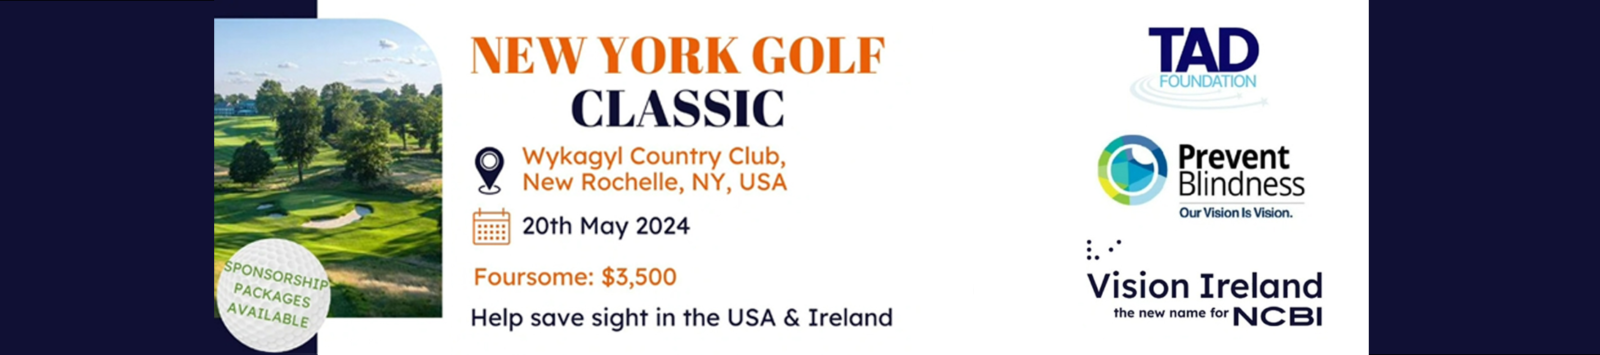 New York Golf Classic, Wykagyl Country Club, New Rochelle, NY, May 20, 2024